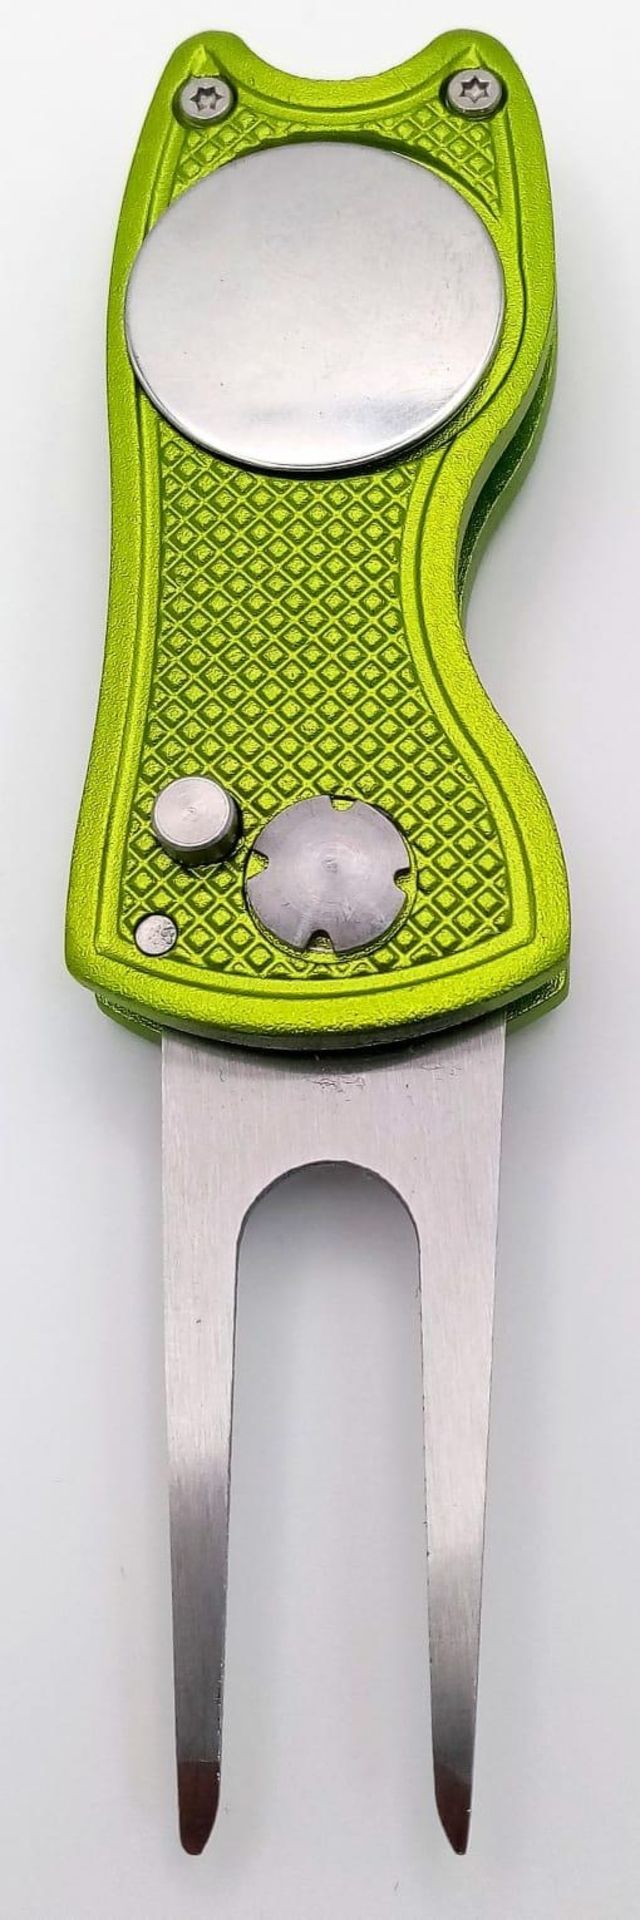 A Masters Golf Branded Putting Green "Flick Tool" Repair Kit - Comes with two commemorative - Image 3 of 3